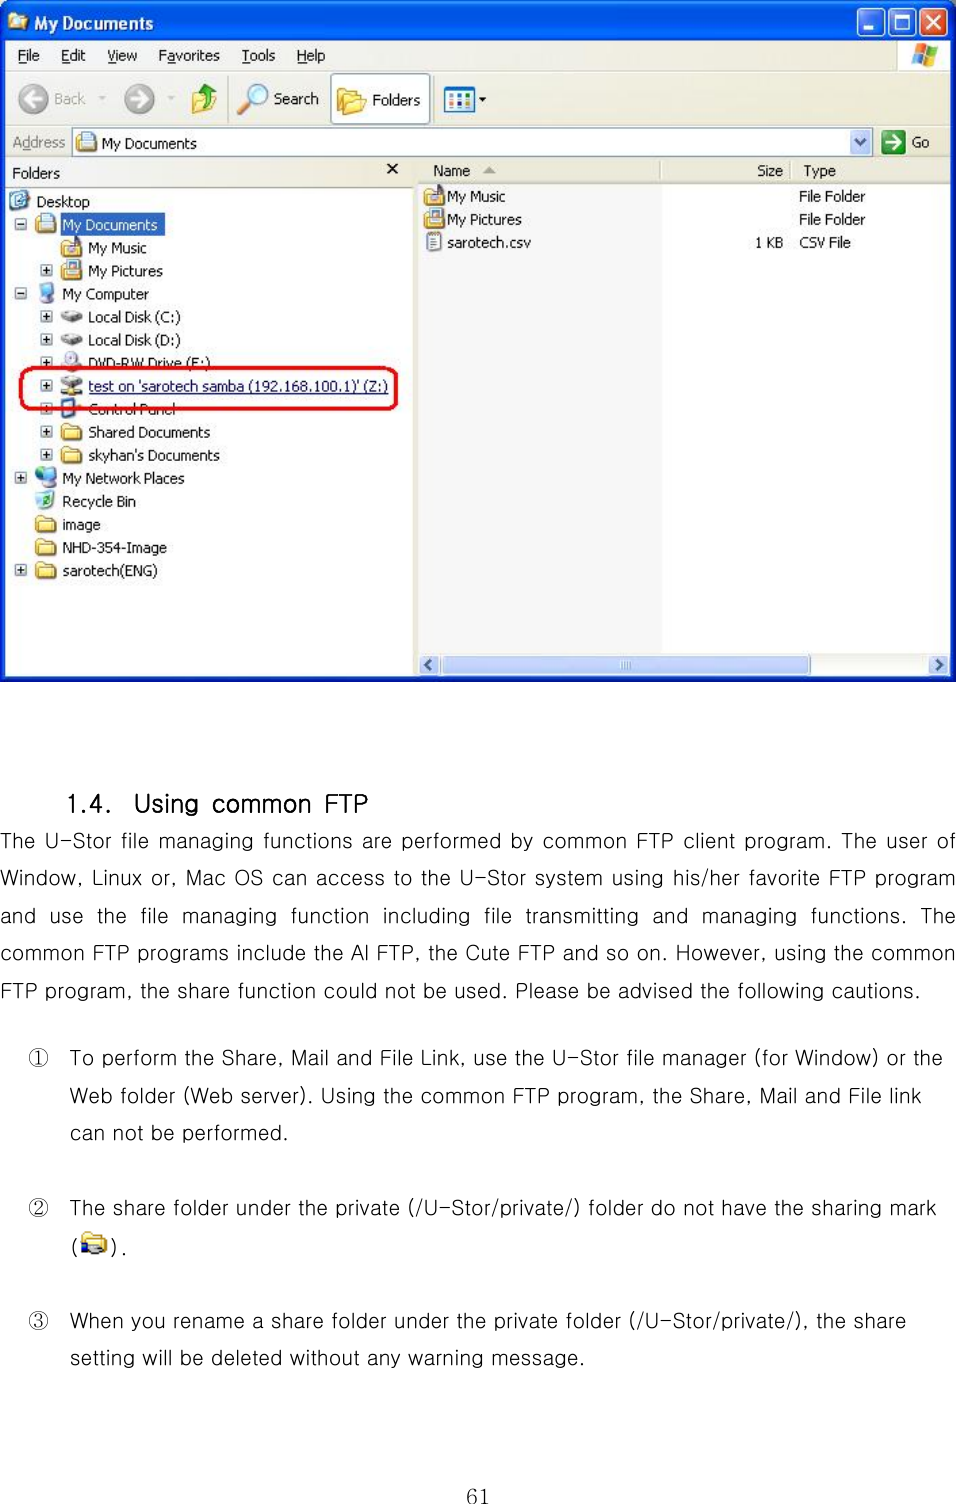  61  1.4.  Using  common  FTP The U-Stor file managing functions are performed by common FTP client program. The user of Window, Linux or, Mac OS can access to the U-Stor system using his/her favorite FTP program and  use  the  file  managing  function  including  file  transmitting  and  managing  functions.  The common FTP programs include the Al FTP, the Cute FTP and so on. However, using the common FTP program, the share function could not be used. Please be advised the following cautions. ①  To perform the Share, Mail and File Link, use the U-Stor file manager (for Window) or the Web folder (Web server). Using the common FTP program, the Share, Mail and File link can not be performed. ②  The share folder under the private (/U-Stor/private/) folder do not have the sharing mark (). ③  When you rename a share folder under the private folder (/U-Stor/private/), the share setting will be deleted without any warning message.   